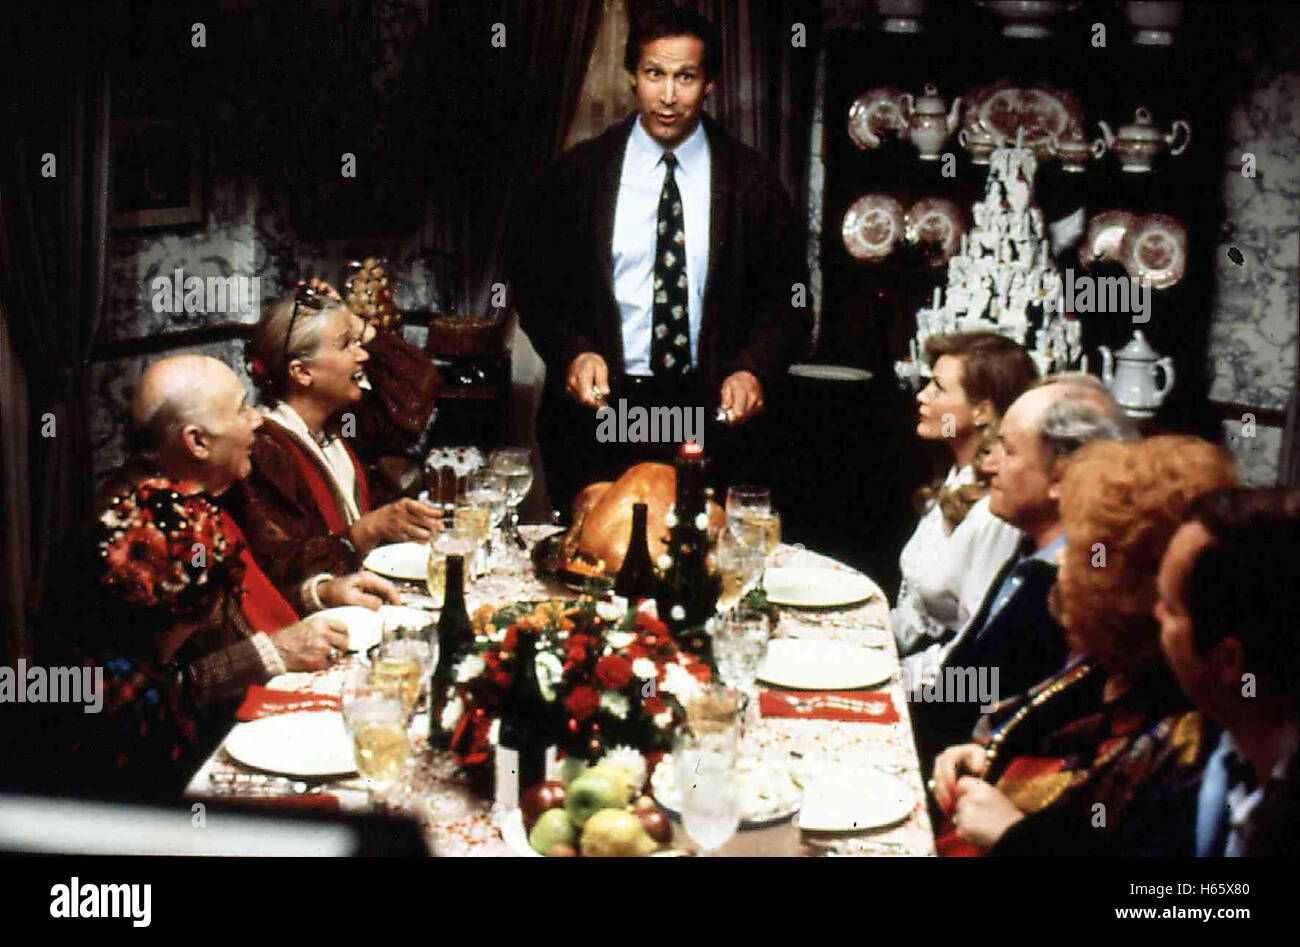 Hilfe, es weihnachtet sehr, USA 1989 aka. National Lampoon's Christmas Vacation, Direttore: Geremia S. Chechik, attori/stelle: Chevy Chase, Beverly D'Angelo, Juliette Lewis Foto Stock